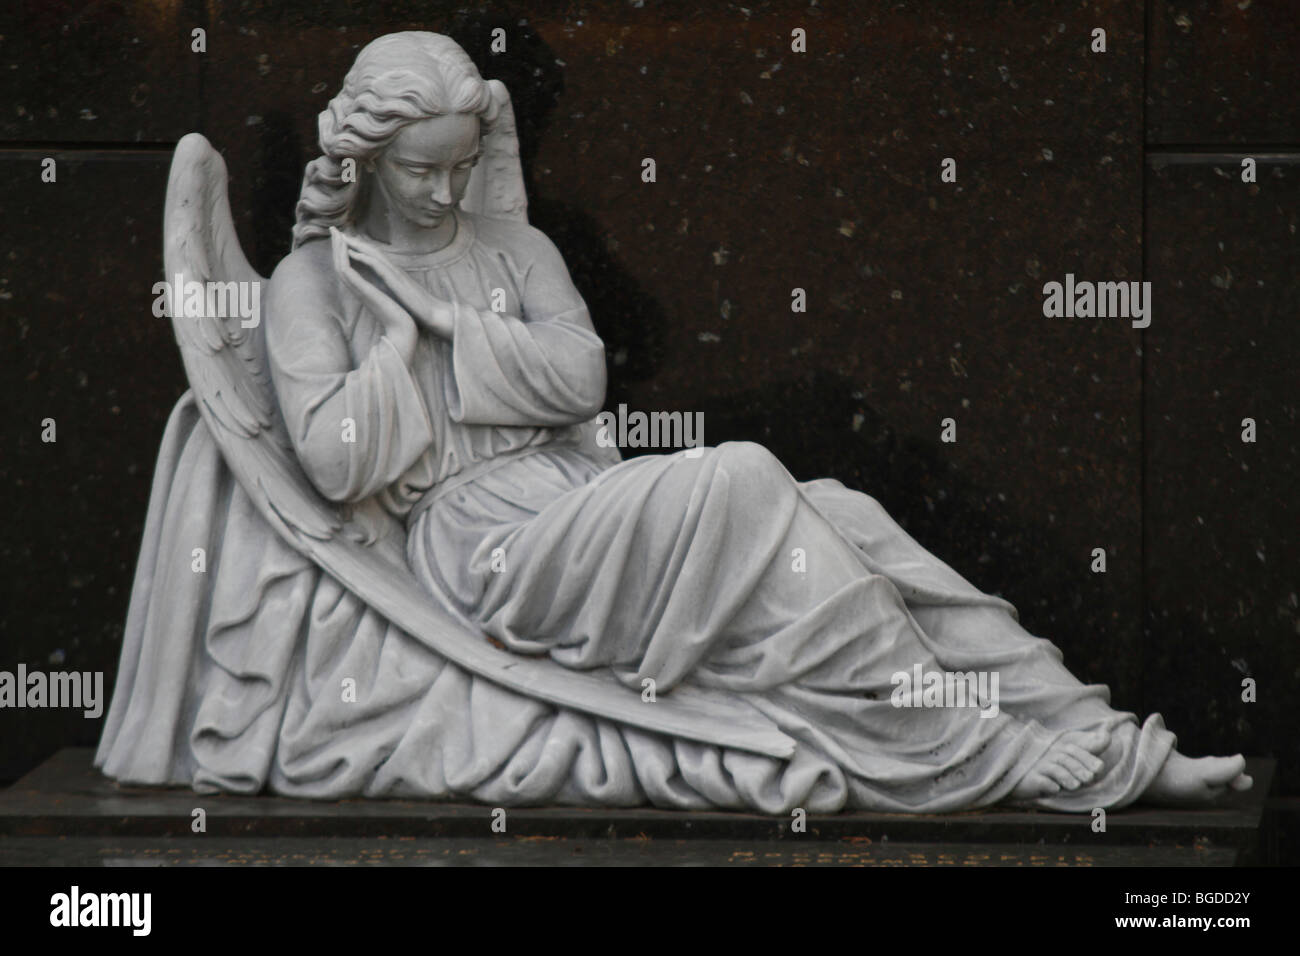 Seated praying angel in front of black marble, tomb, Cimetière du Vieux Château cemetery, Nice, Alpes Maritimes, Région Provenc Stock Photo